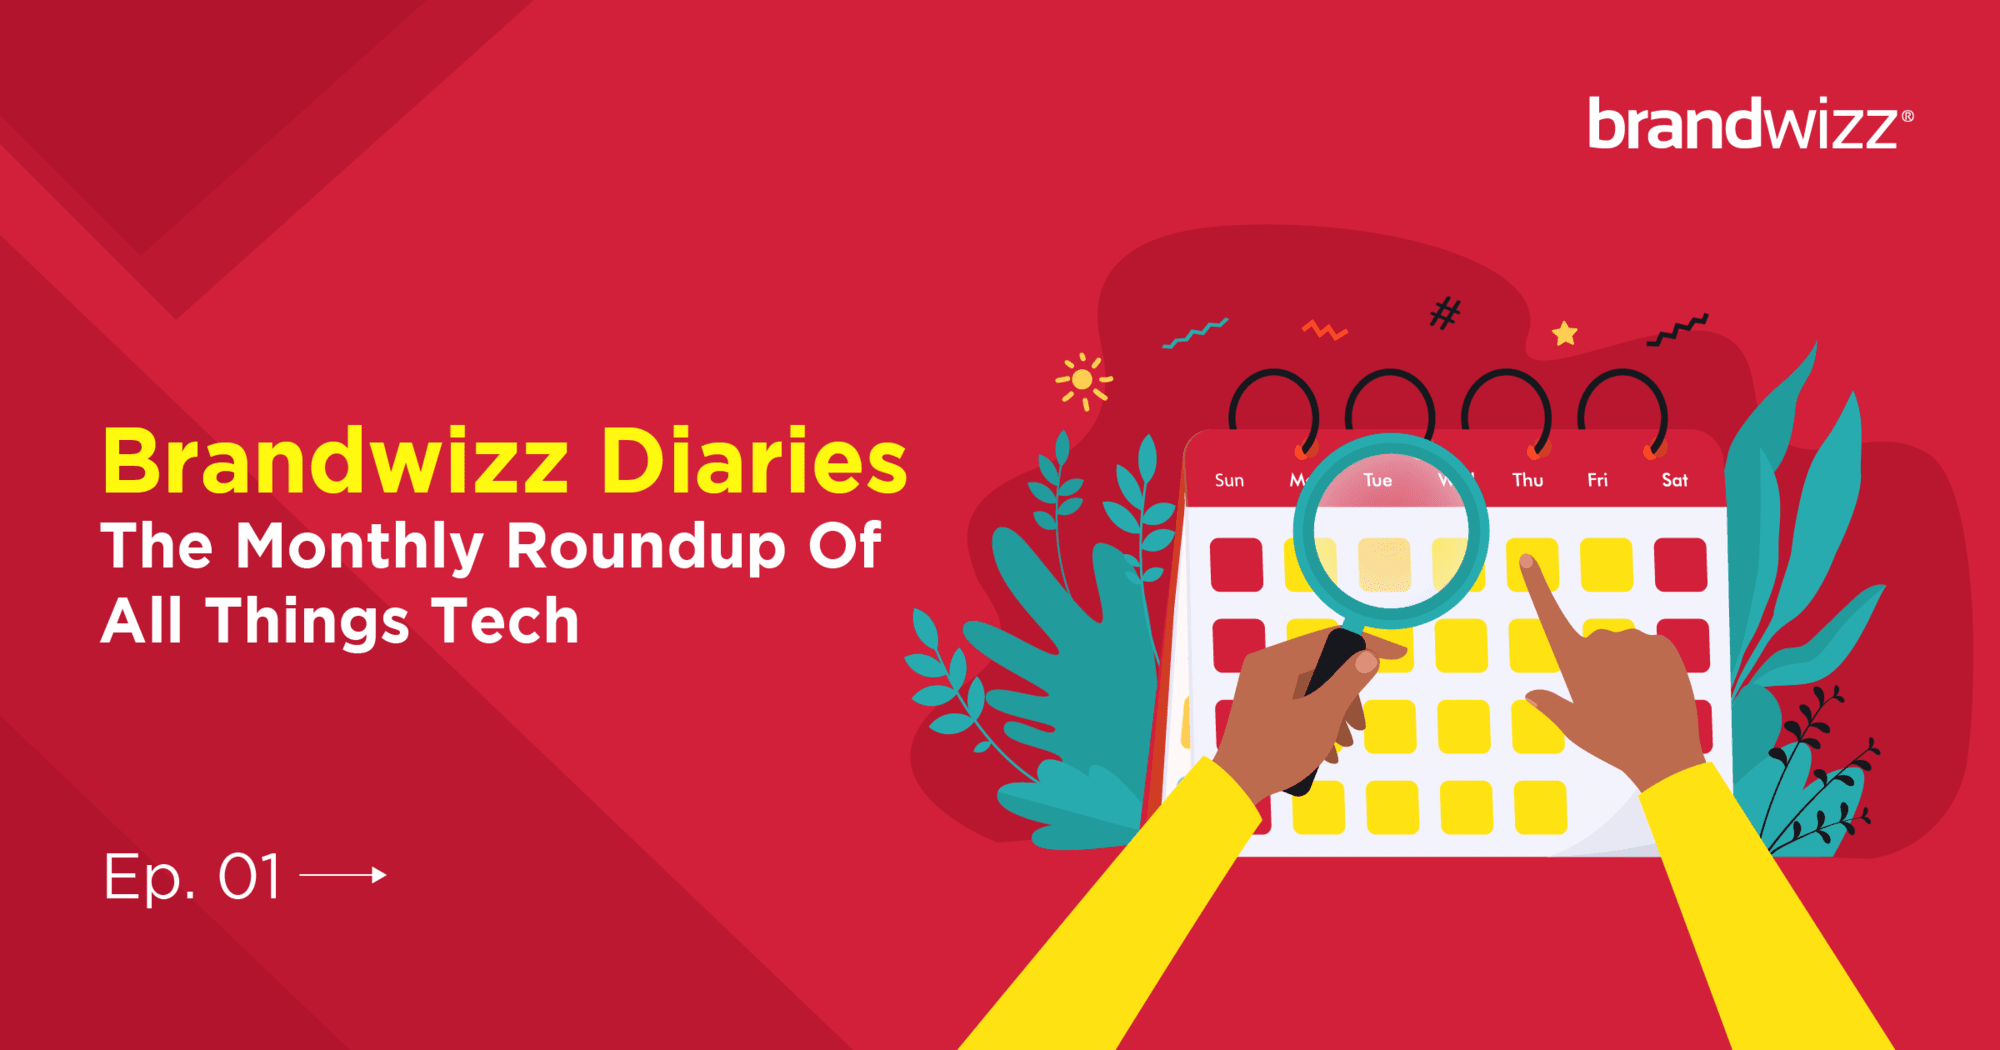 BrandwizzDiaries – The Monthly (November ’22) Roundup Of All Things Tech